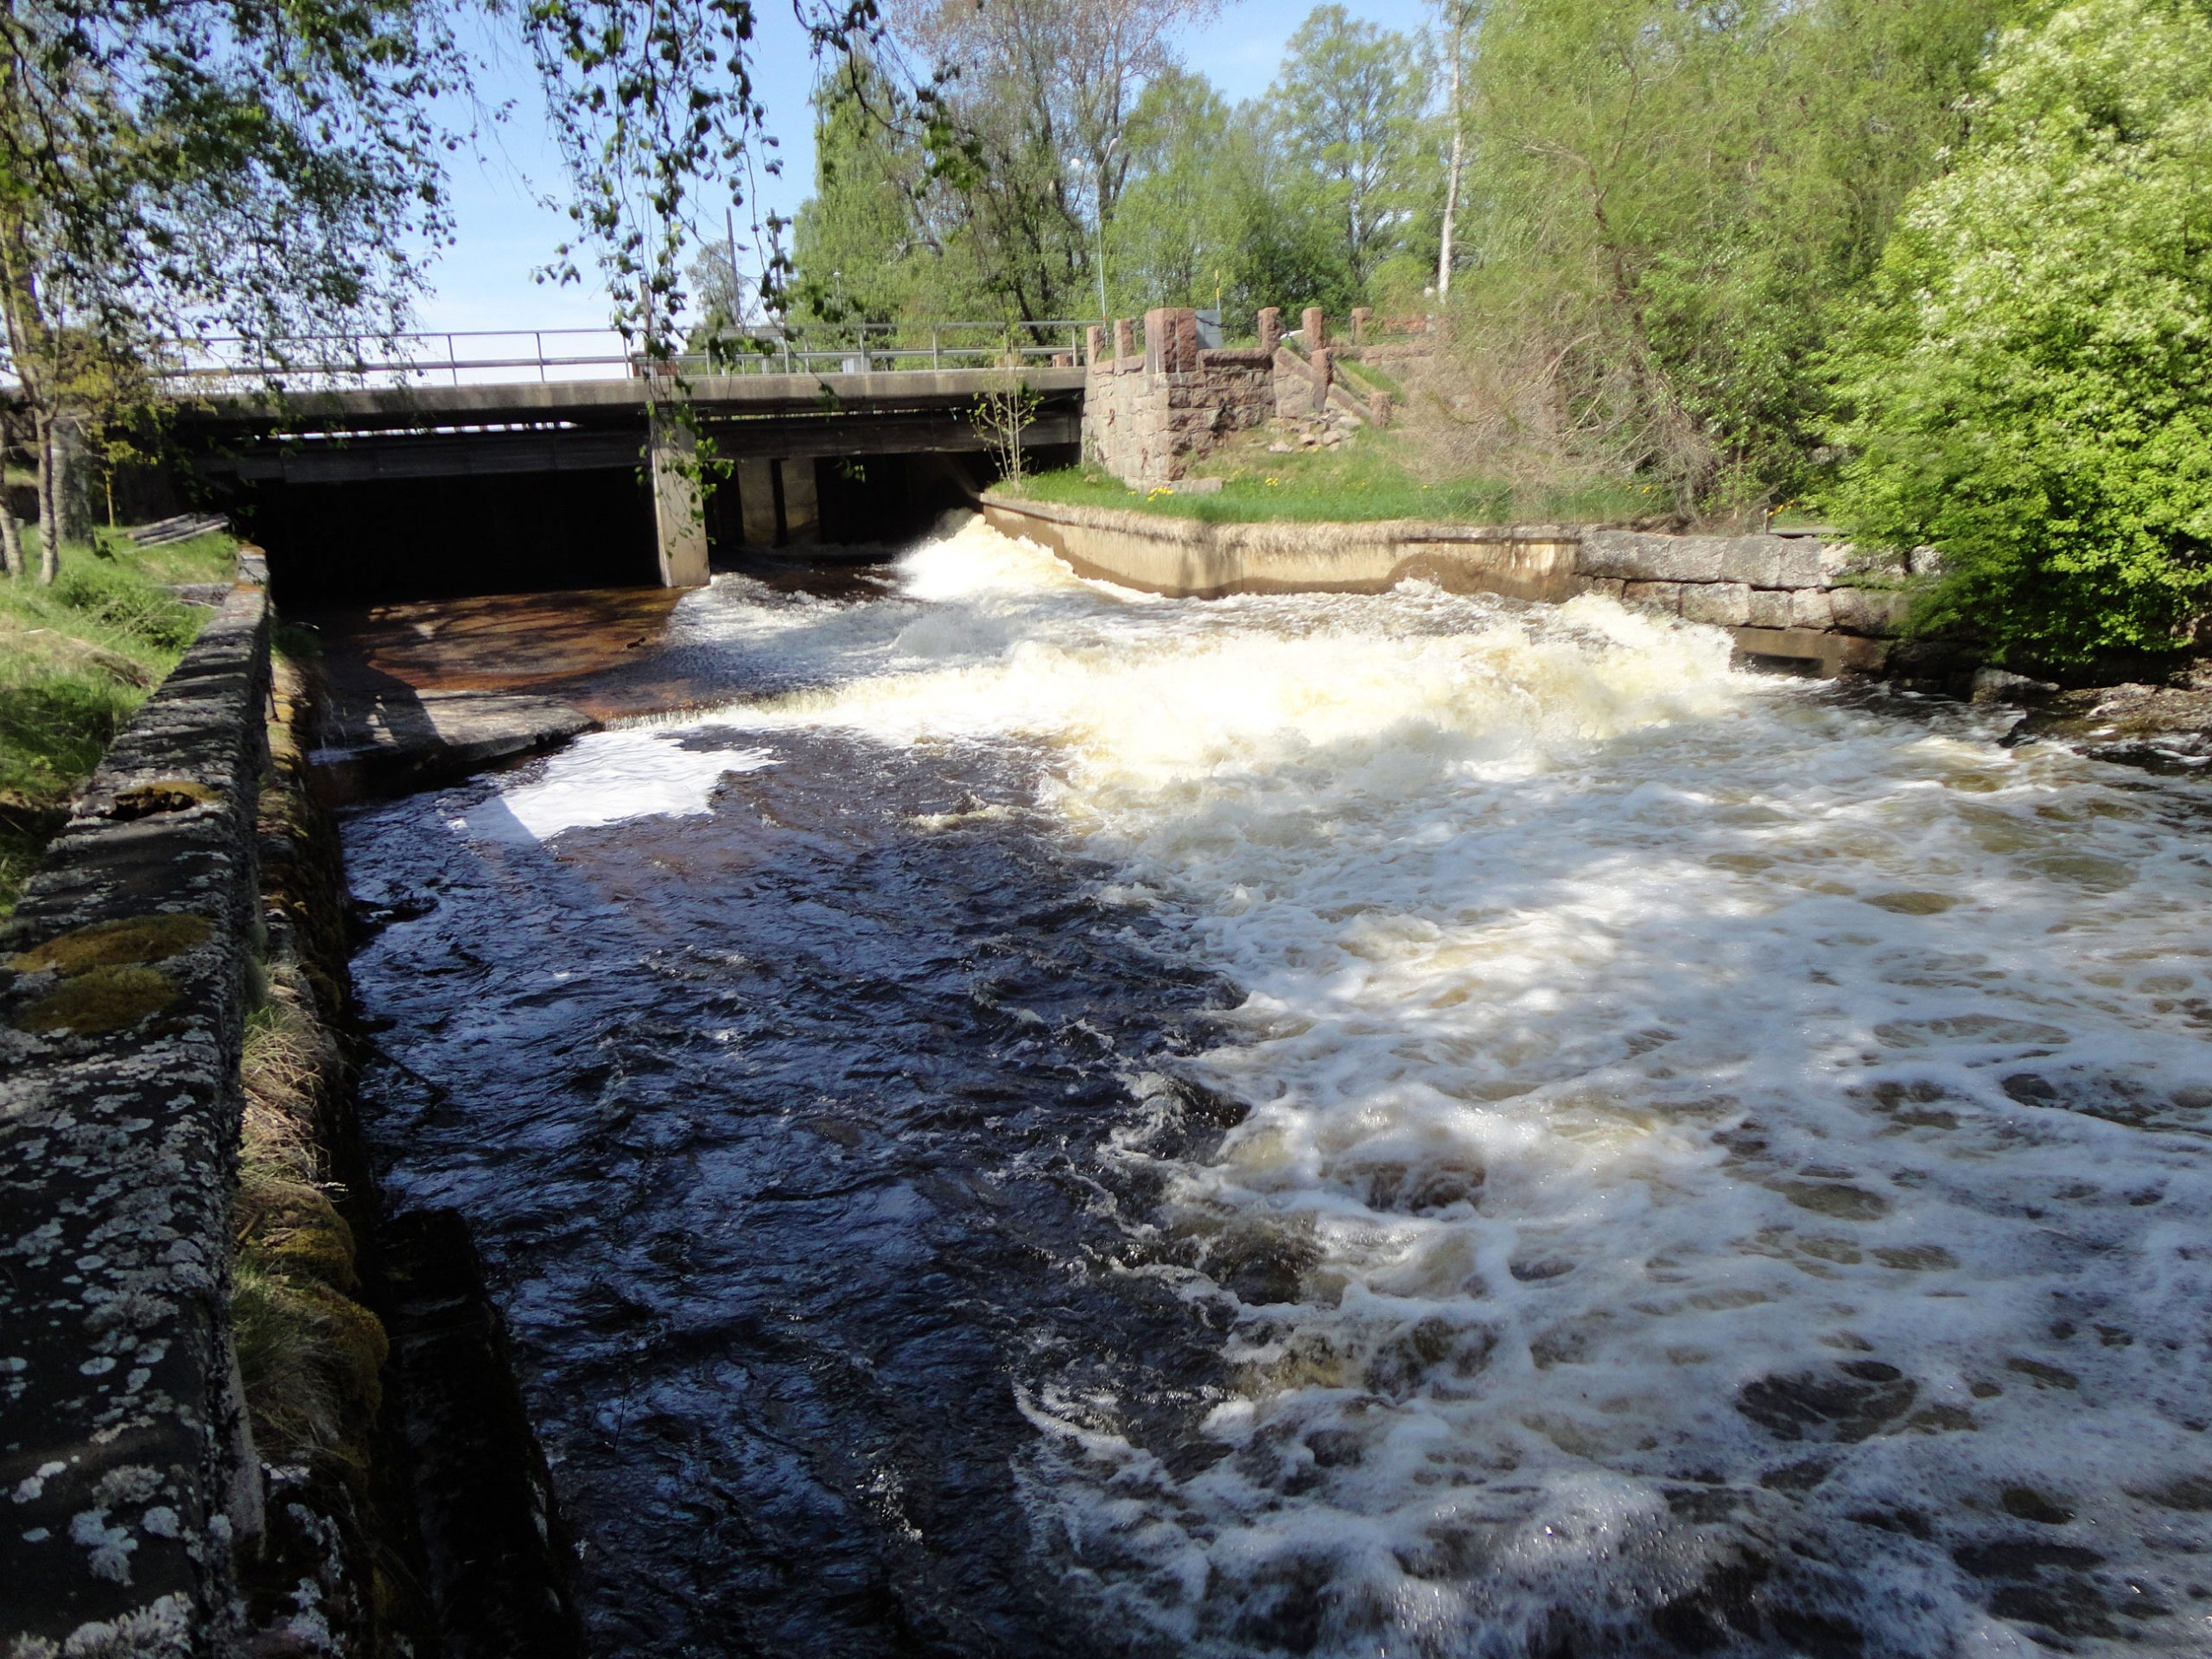 We can expect more dam removals in Sweden in the next decade